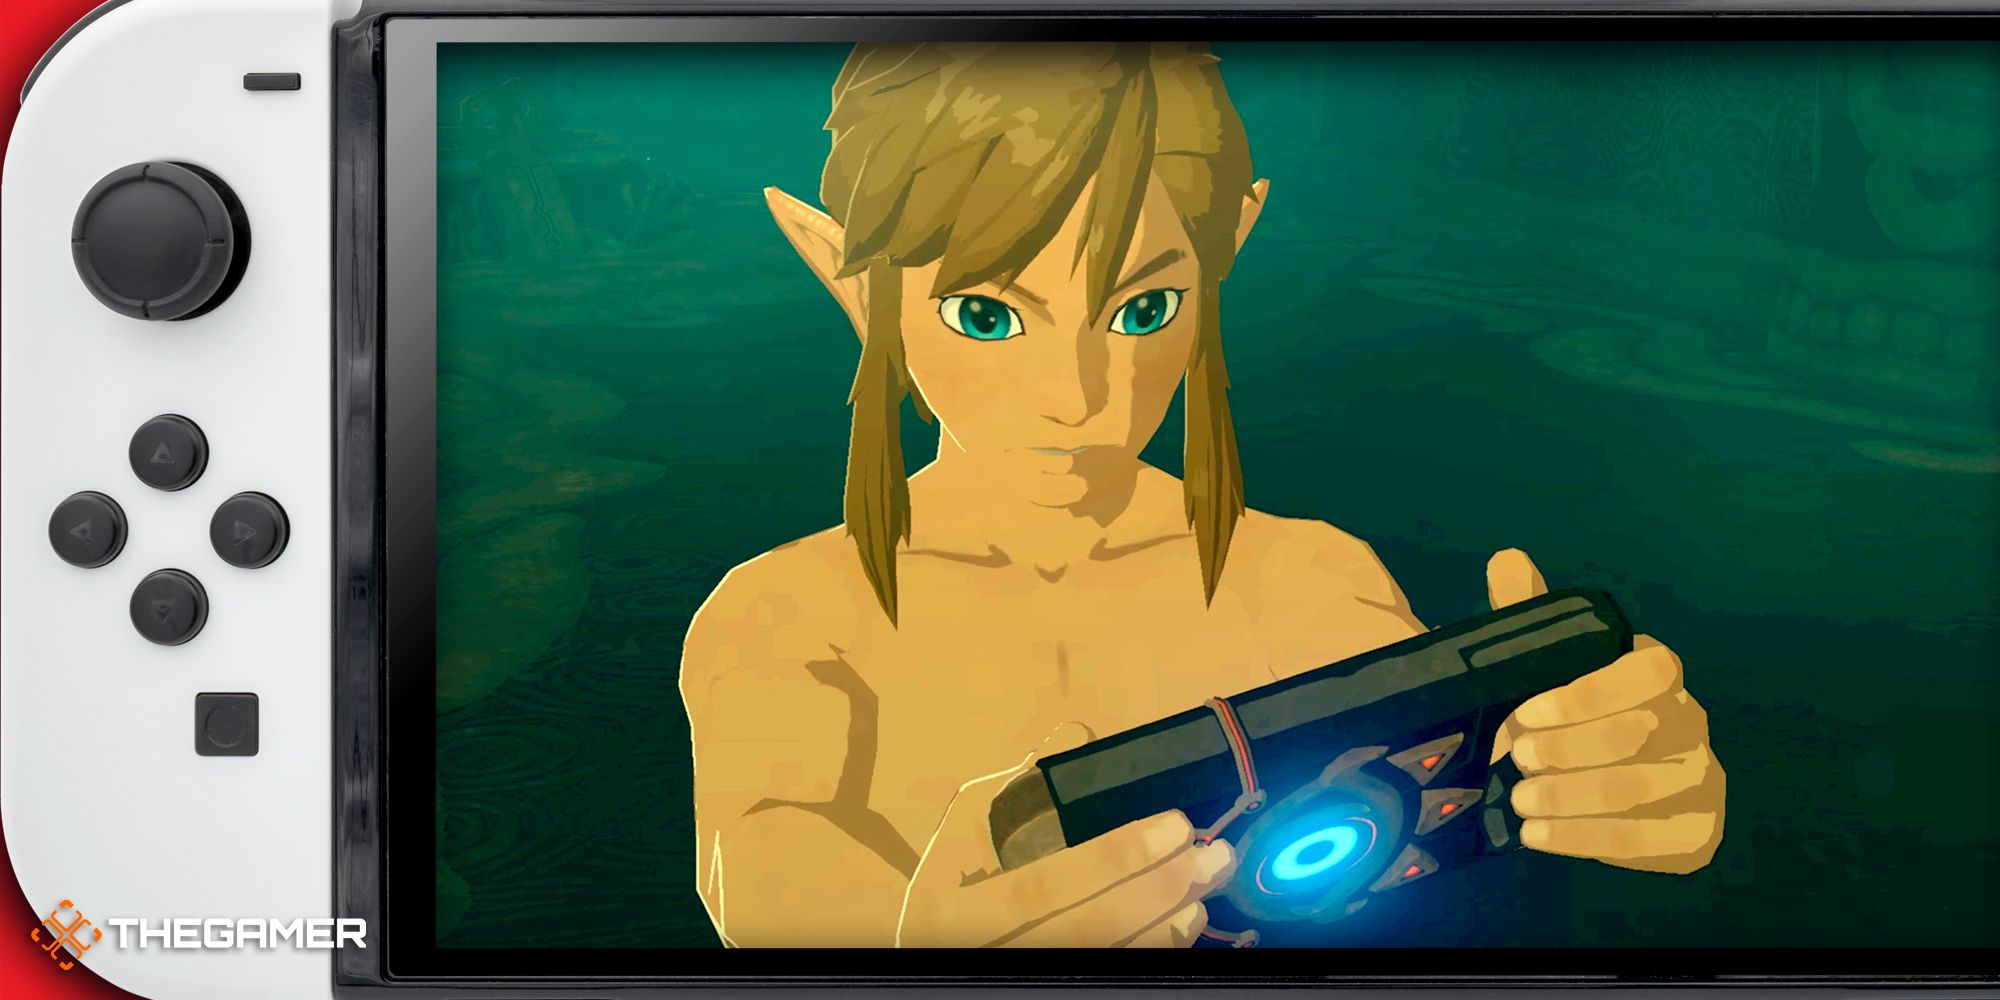 Nintendo Switch 2 Can Finally Give Us The Zelda We've Been Waiting For